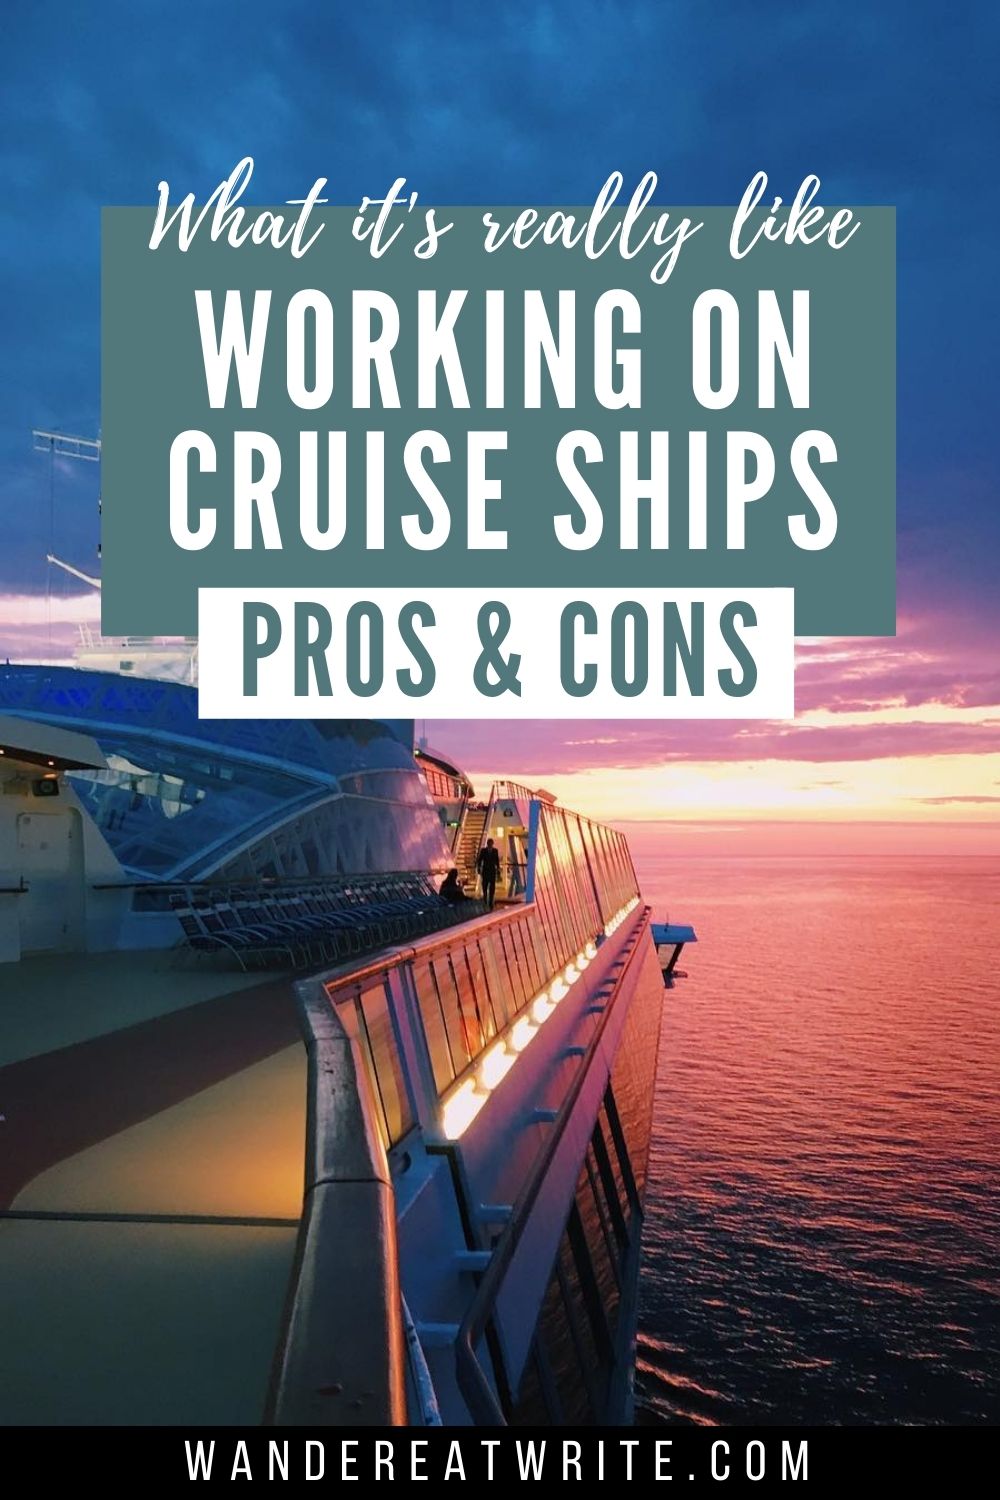 What it's really like working on cruise ships: pros & cons; background photo: pink sunset and sea from top open deck of cruise ship